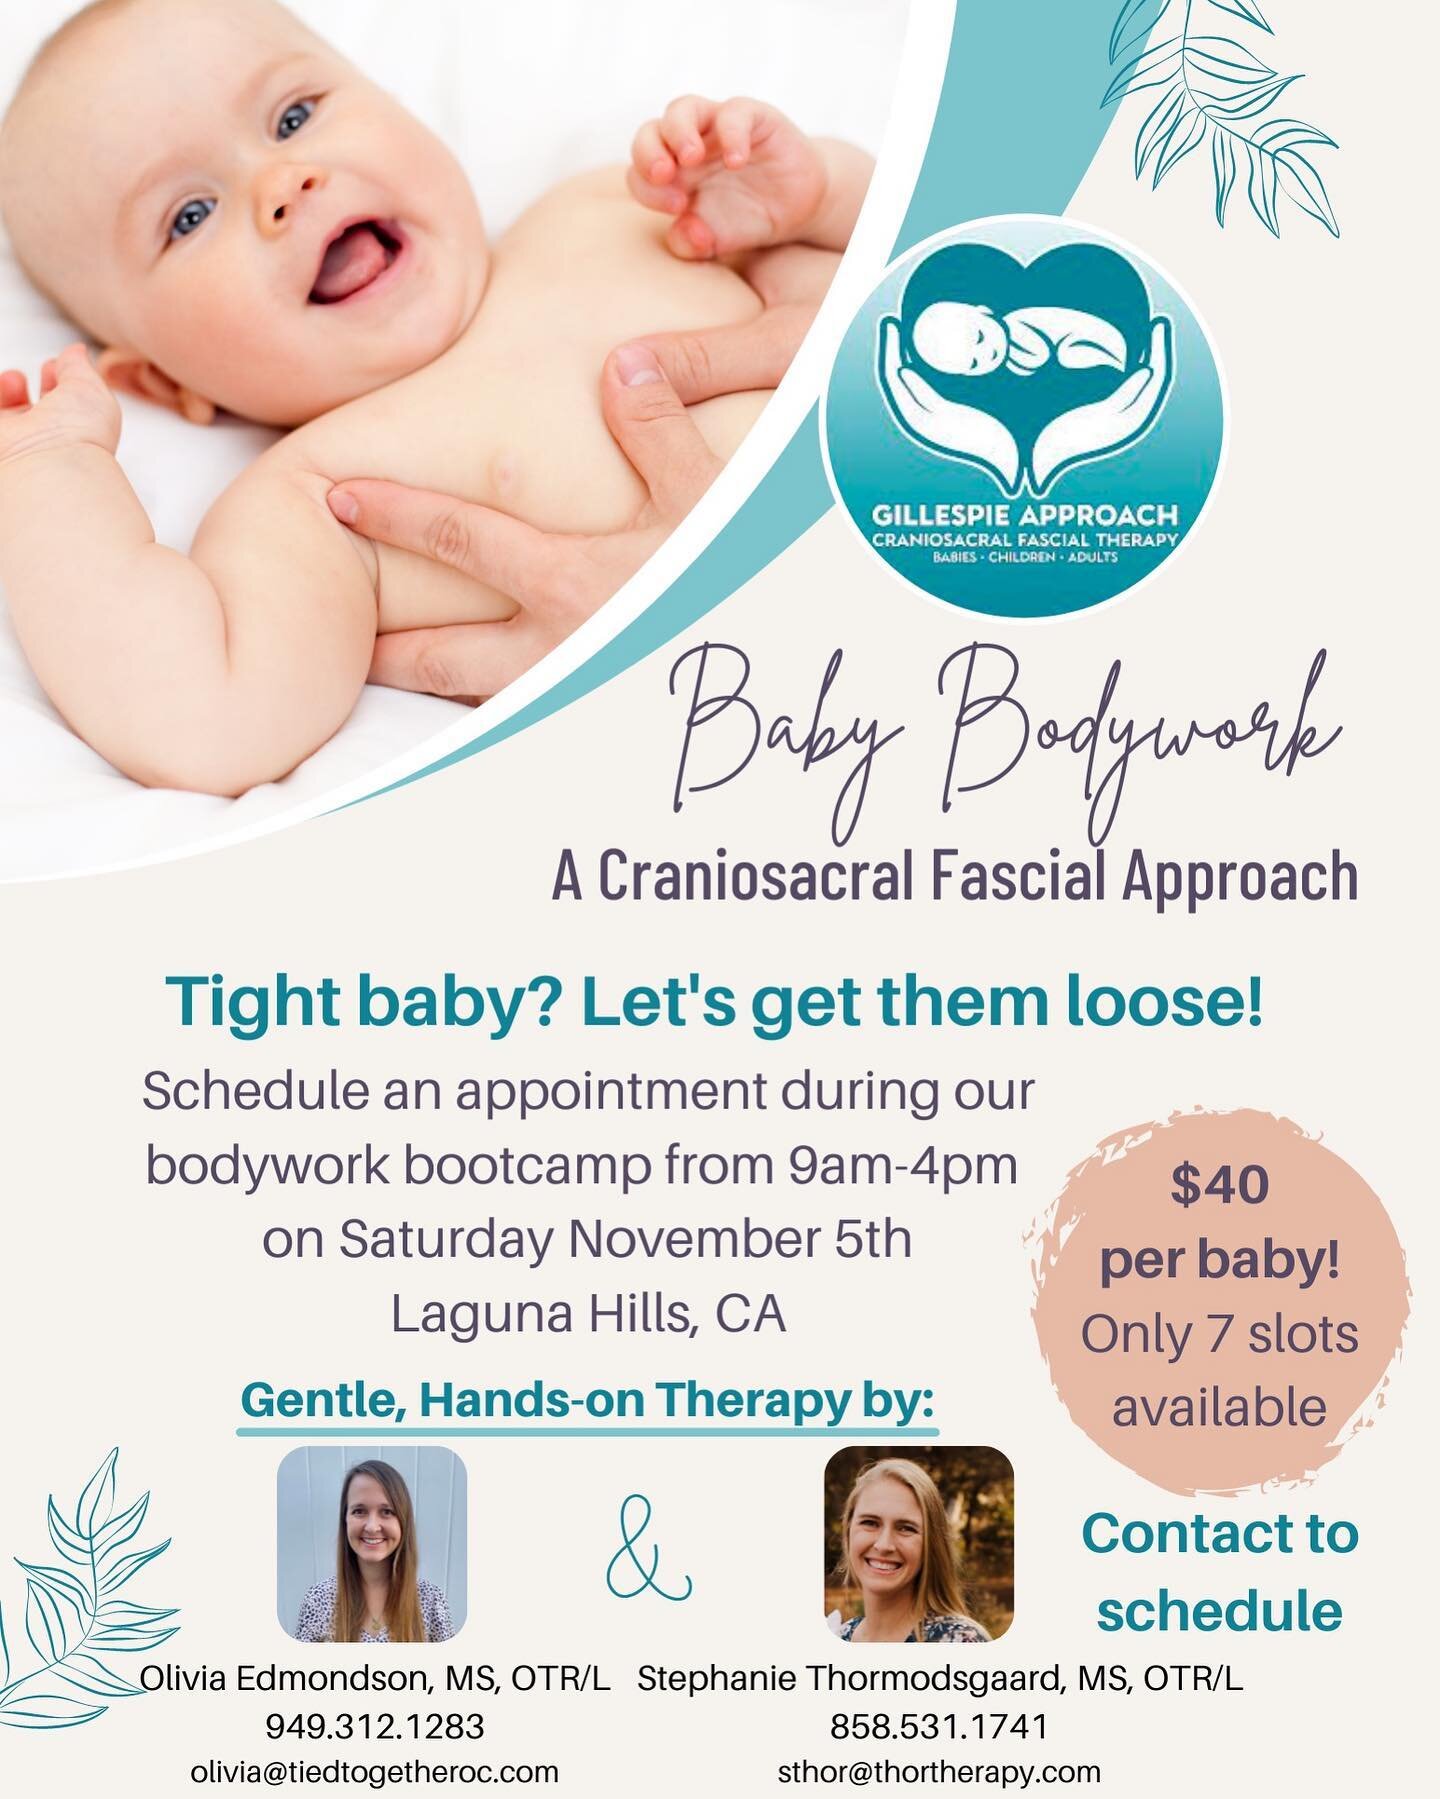 So excited to be hosting this tomorrow! Two spots left, tell your baby friends 🥰

CFT can help infants with&hellip;
-Birth trauma
-Tongue tie/Lip tie
-Torticollis
-Reflux
-Colic
-Inability to latch
-Difficulty sucking
-Difficulty sleeping
-Constipat